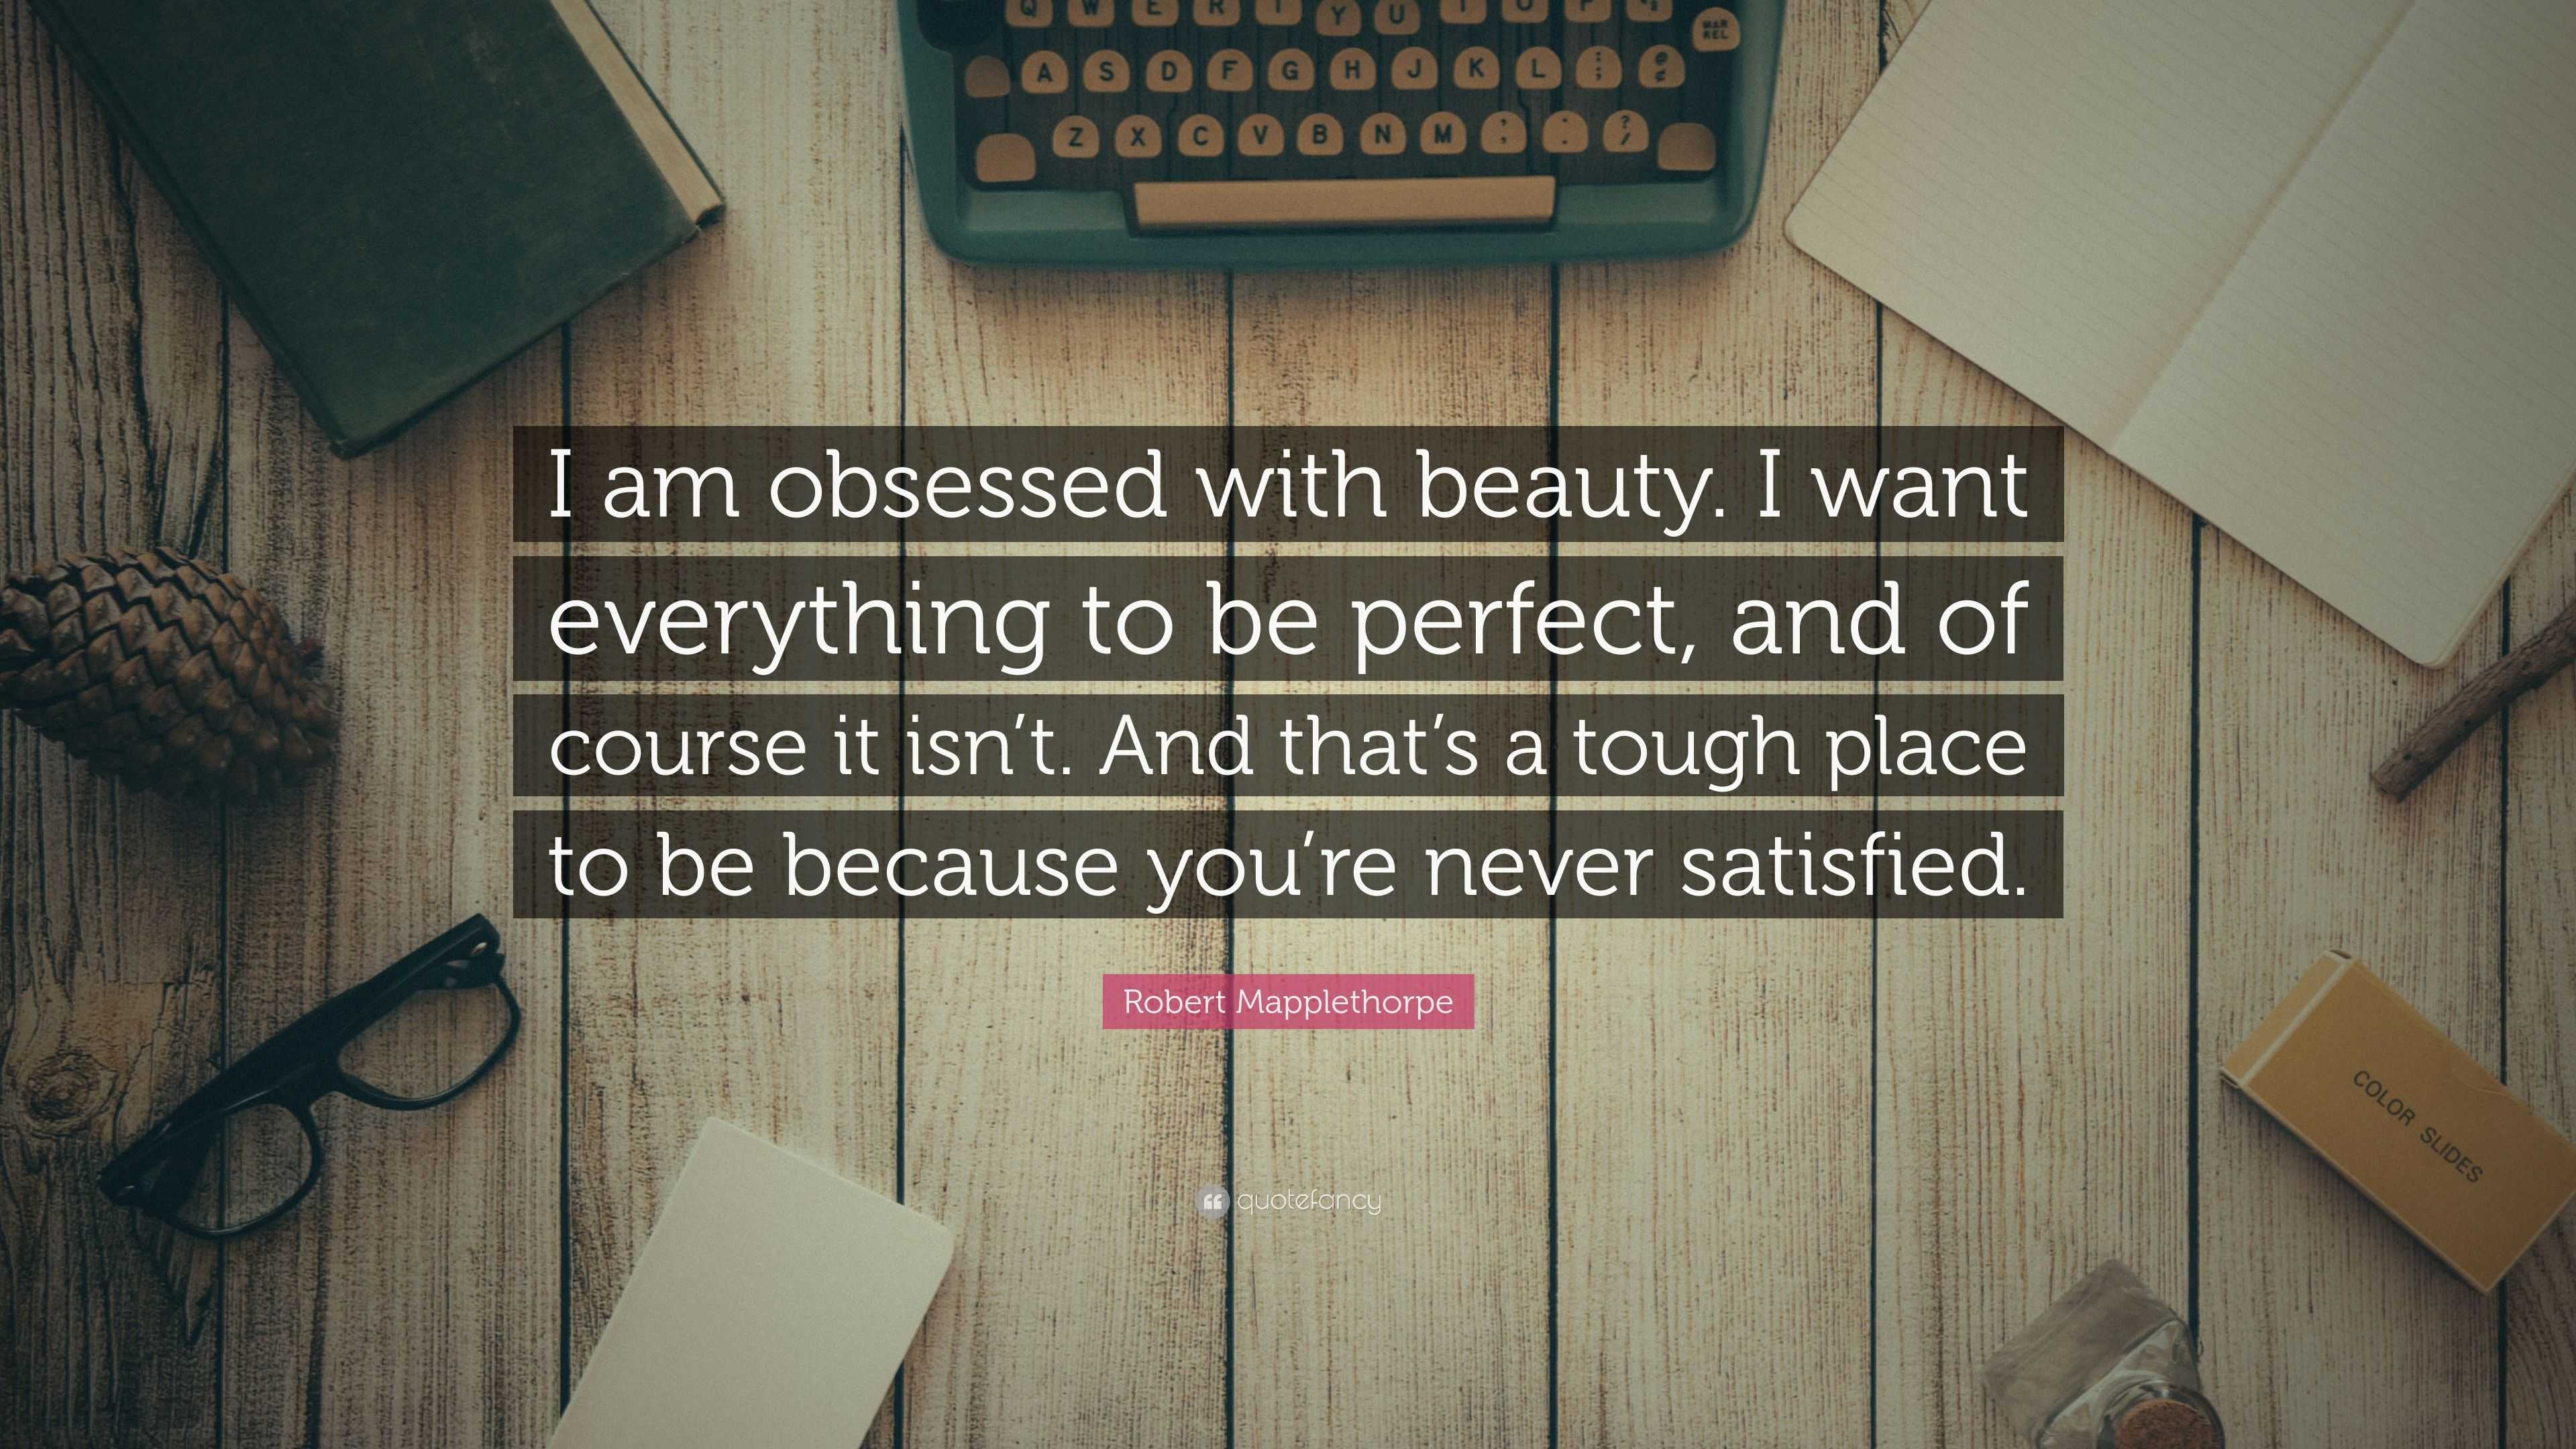 https://quotefancy.com/media/wallpaper/3840x2160/5241823-Robert-Mapplethorpe-Quote-I-am-obsessed-with-beauty-I-want.jpg